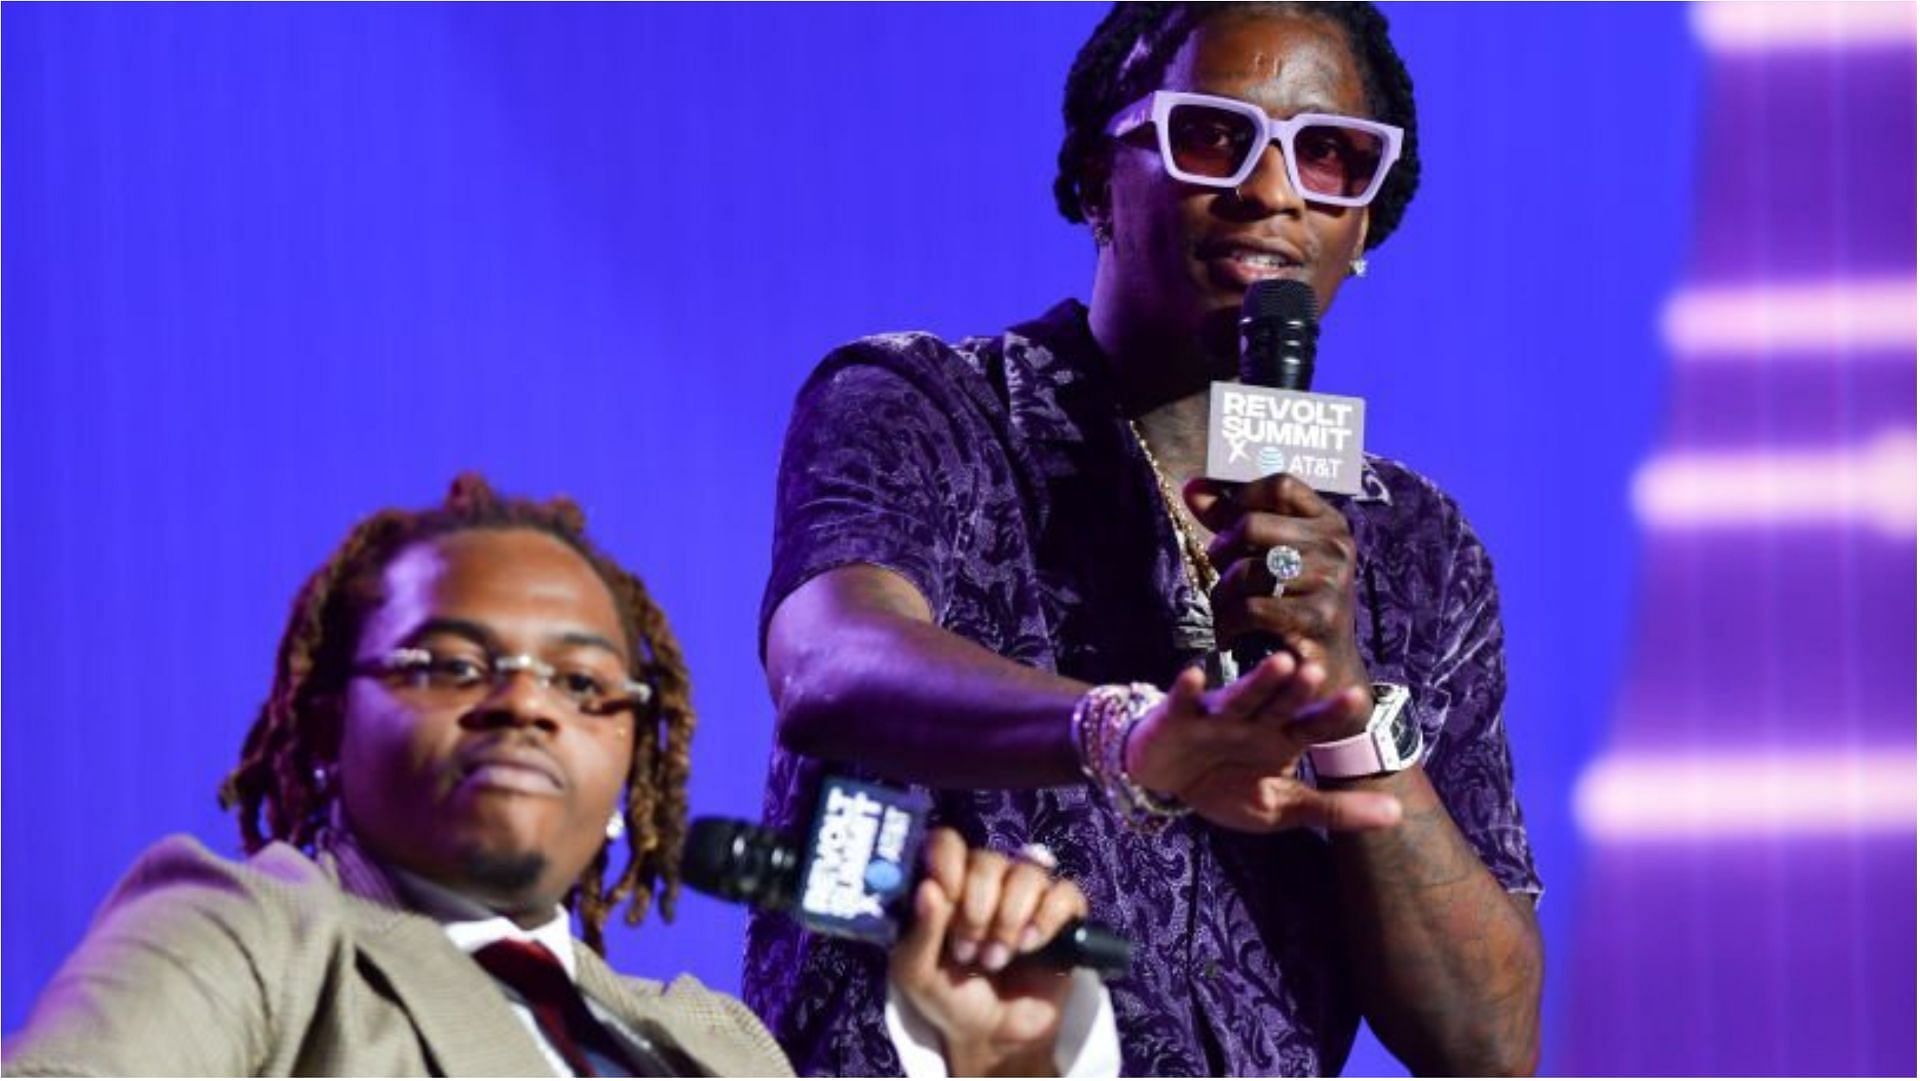 Young Thug and Gunna were among the accused (Image via Prince Williams/Getty Images)